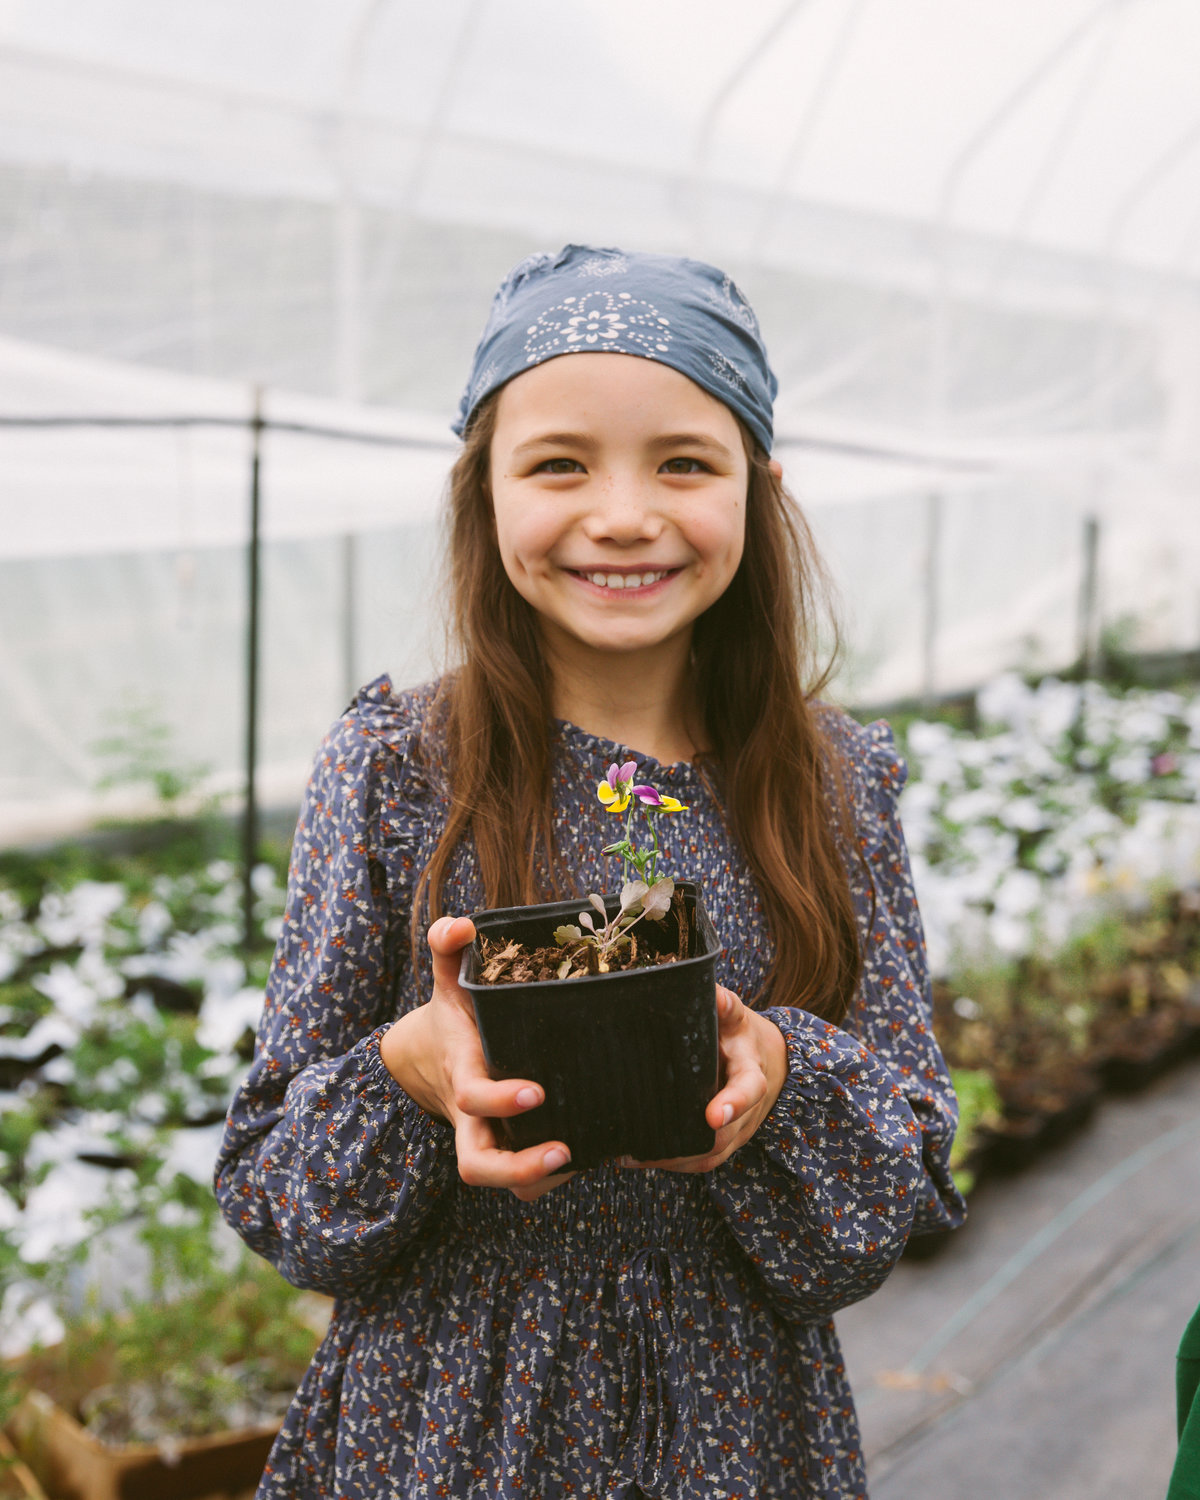 Agnes Regina, 8, also known as “Lieutenant Mom,” holds one of the many perennial flowers growing at The Big Family Farm’s greenhouse.